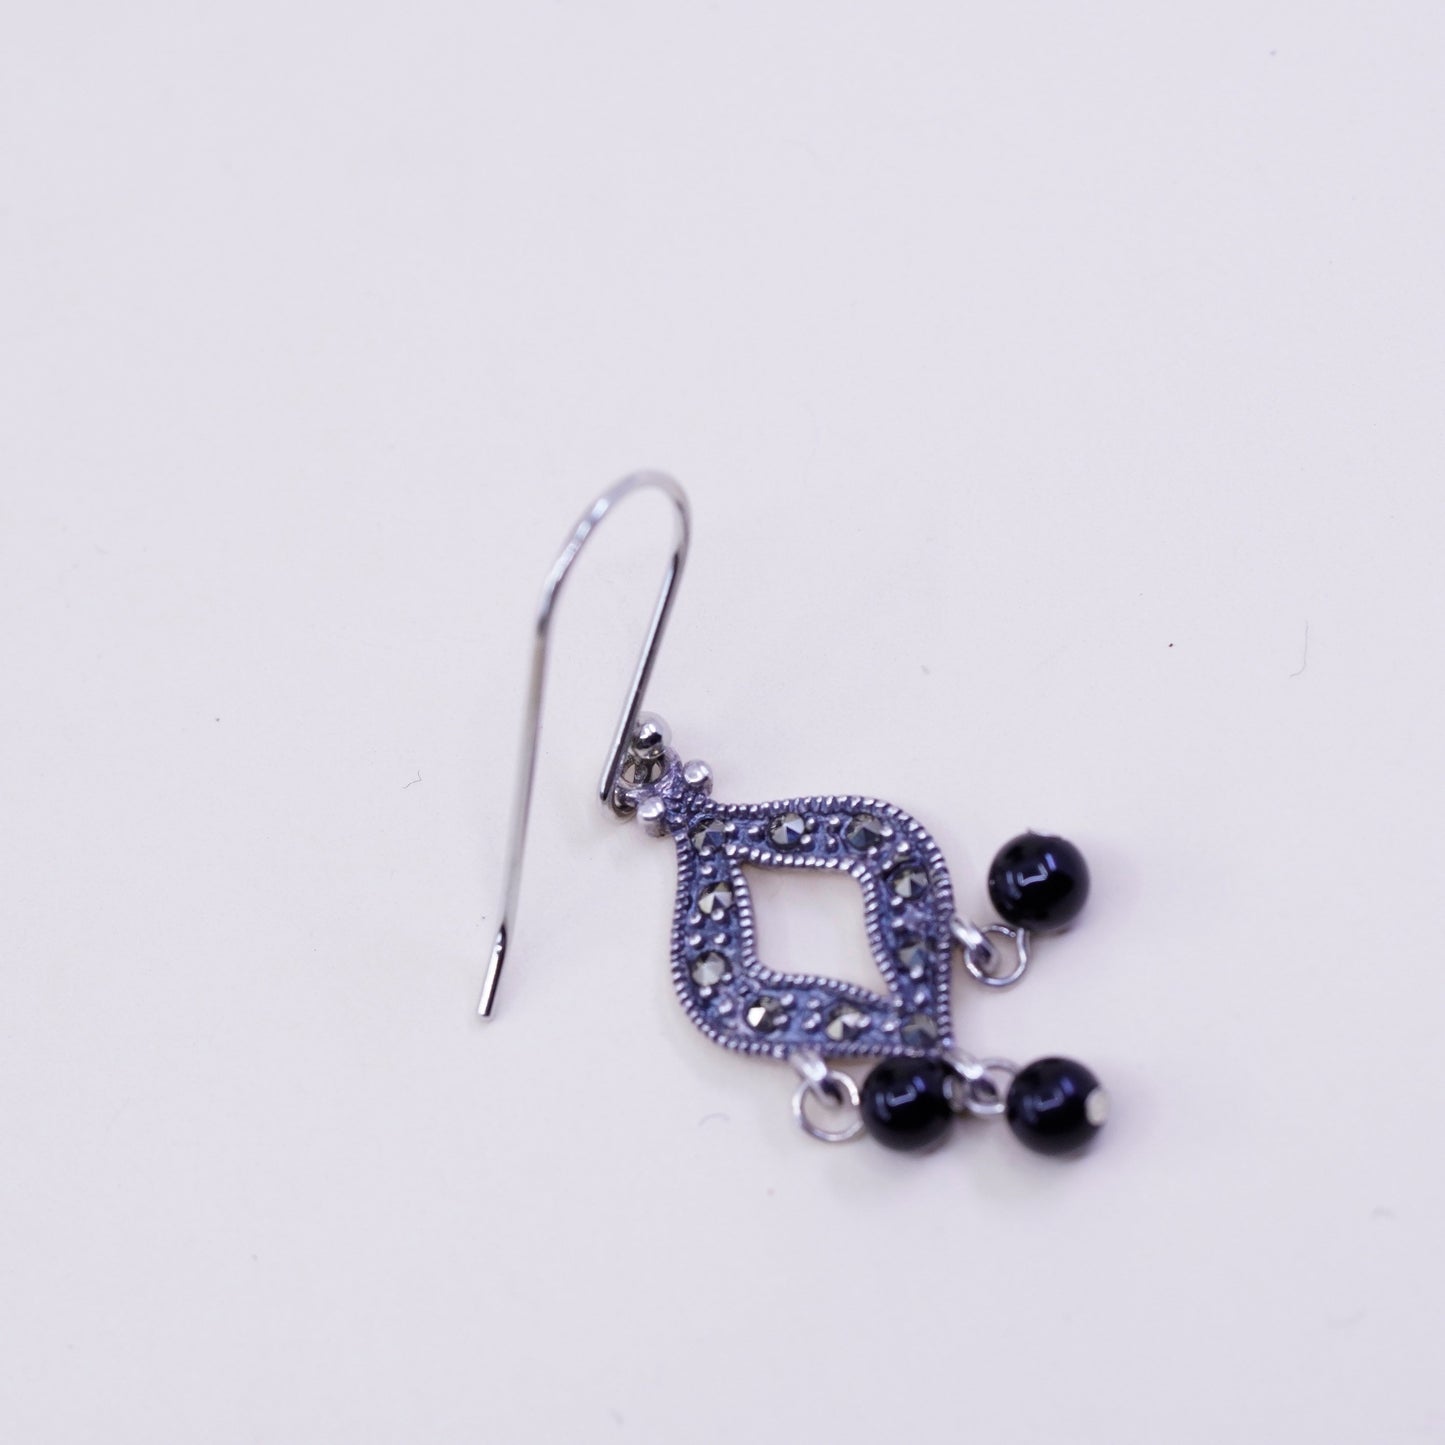 Vintage Sterling silver handmade earrings, 925 drops with obsidian and marcasite, stamped 925 China